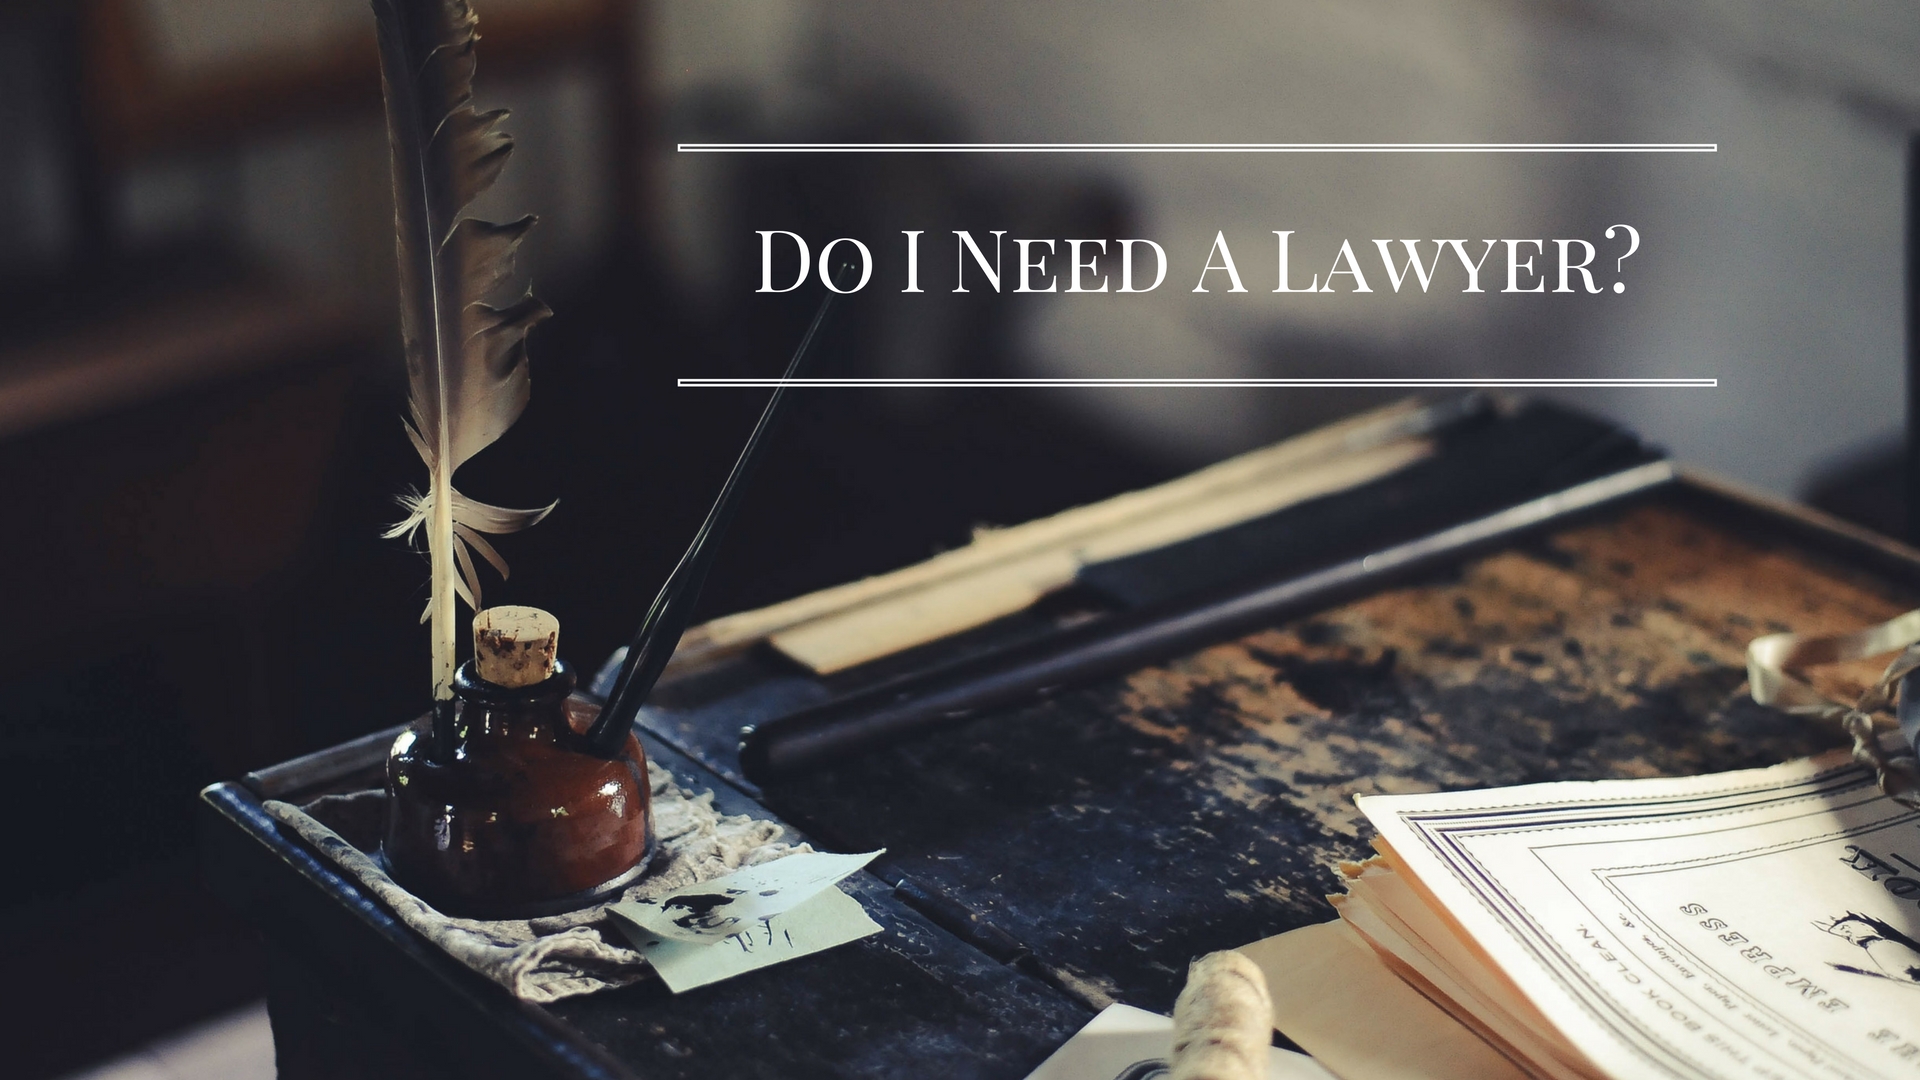 Do I need a lawyer to write Terms of Use & Privacy Policy? By K